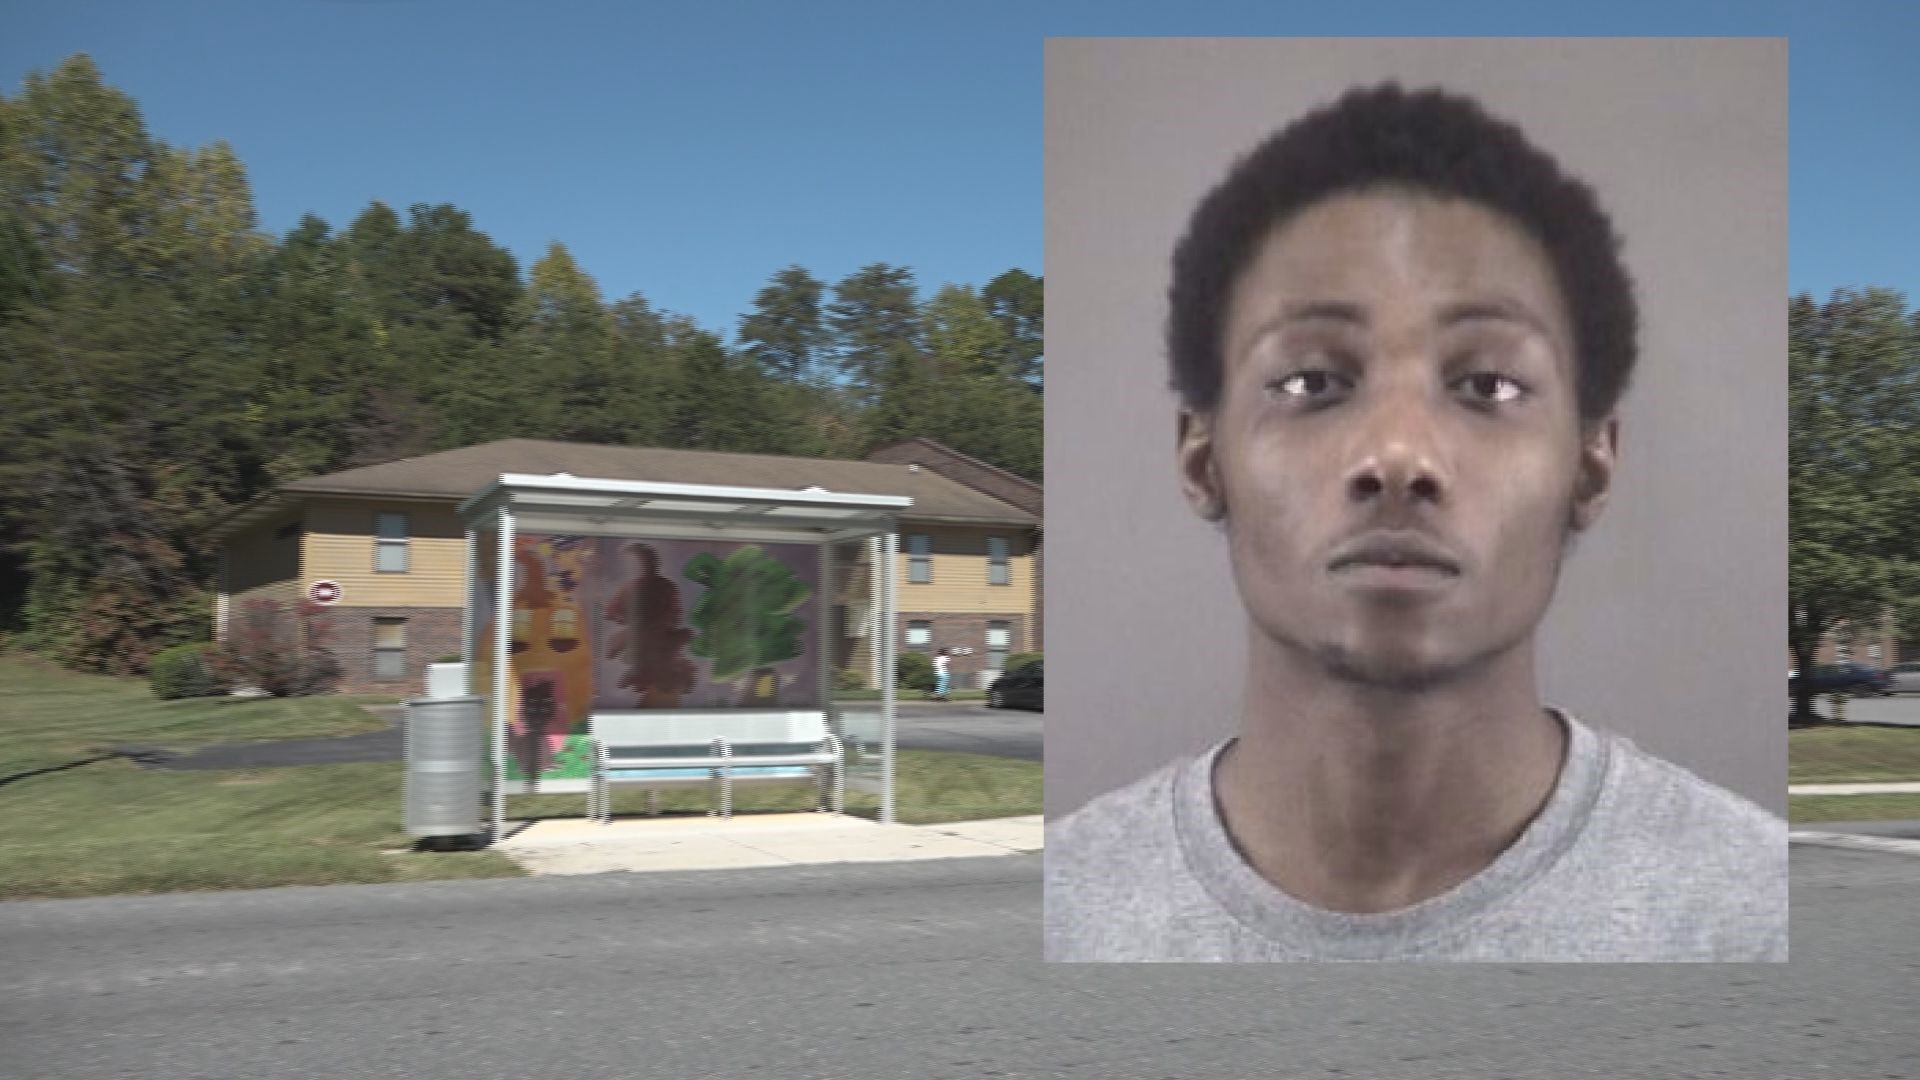 The Kent County Sheriff’s Office said a 19-year-old man from New York met a 13-year-old girl from Michigan online. The two hopped on a bus to Winston-Salem Monday.